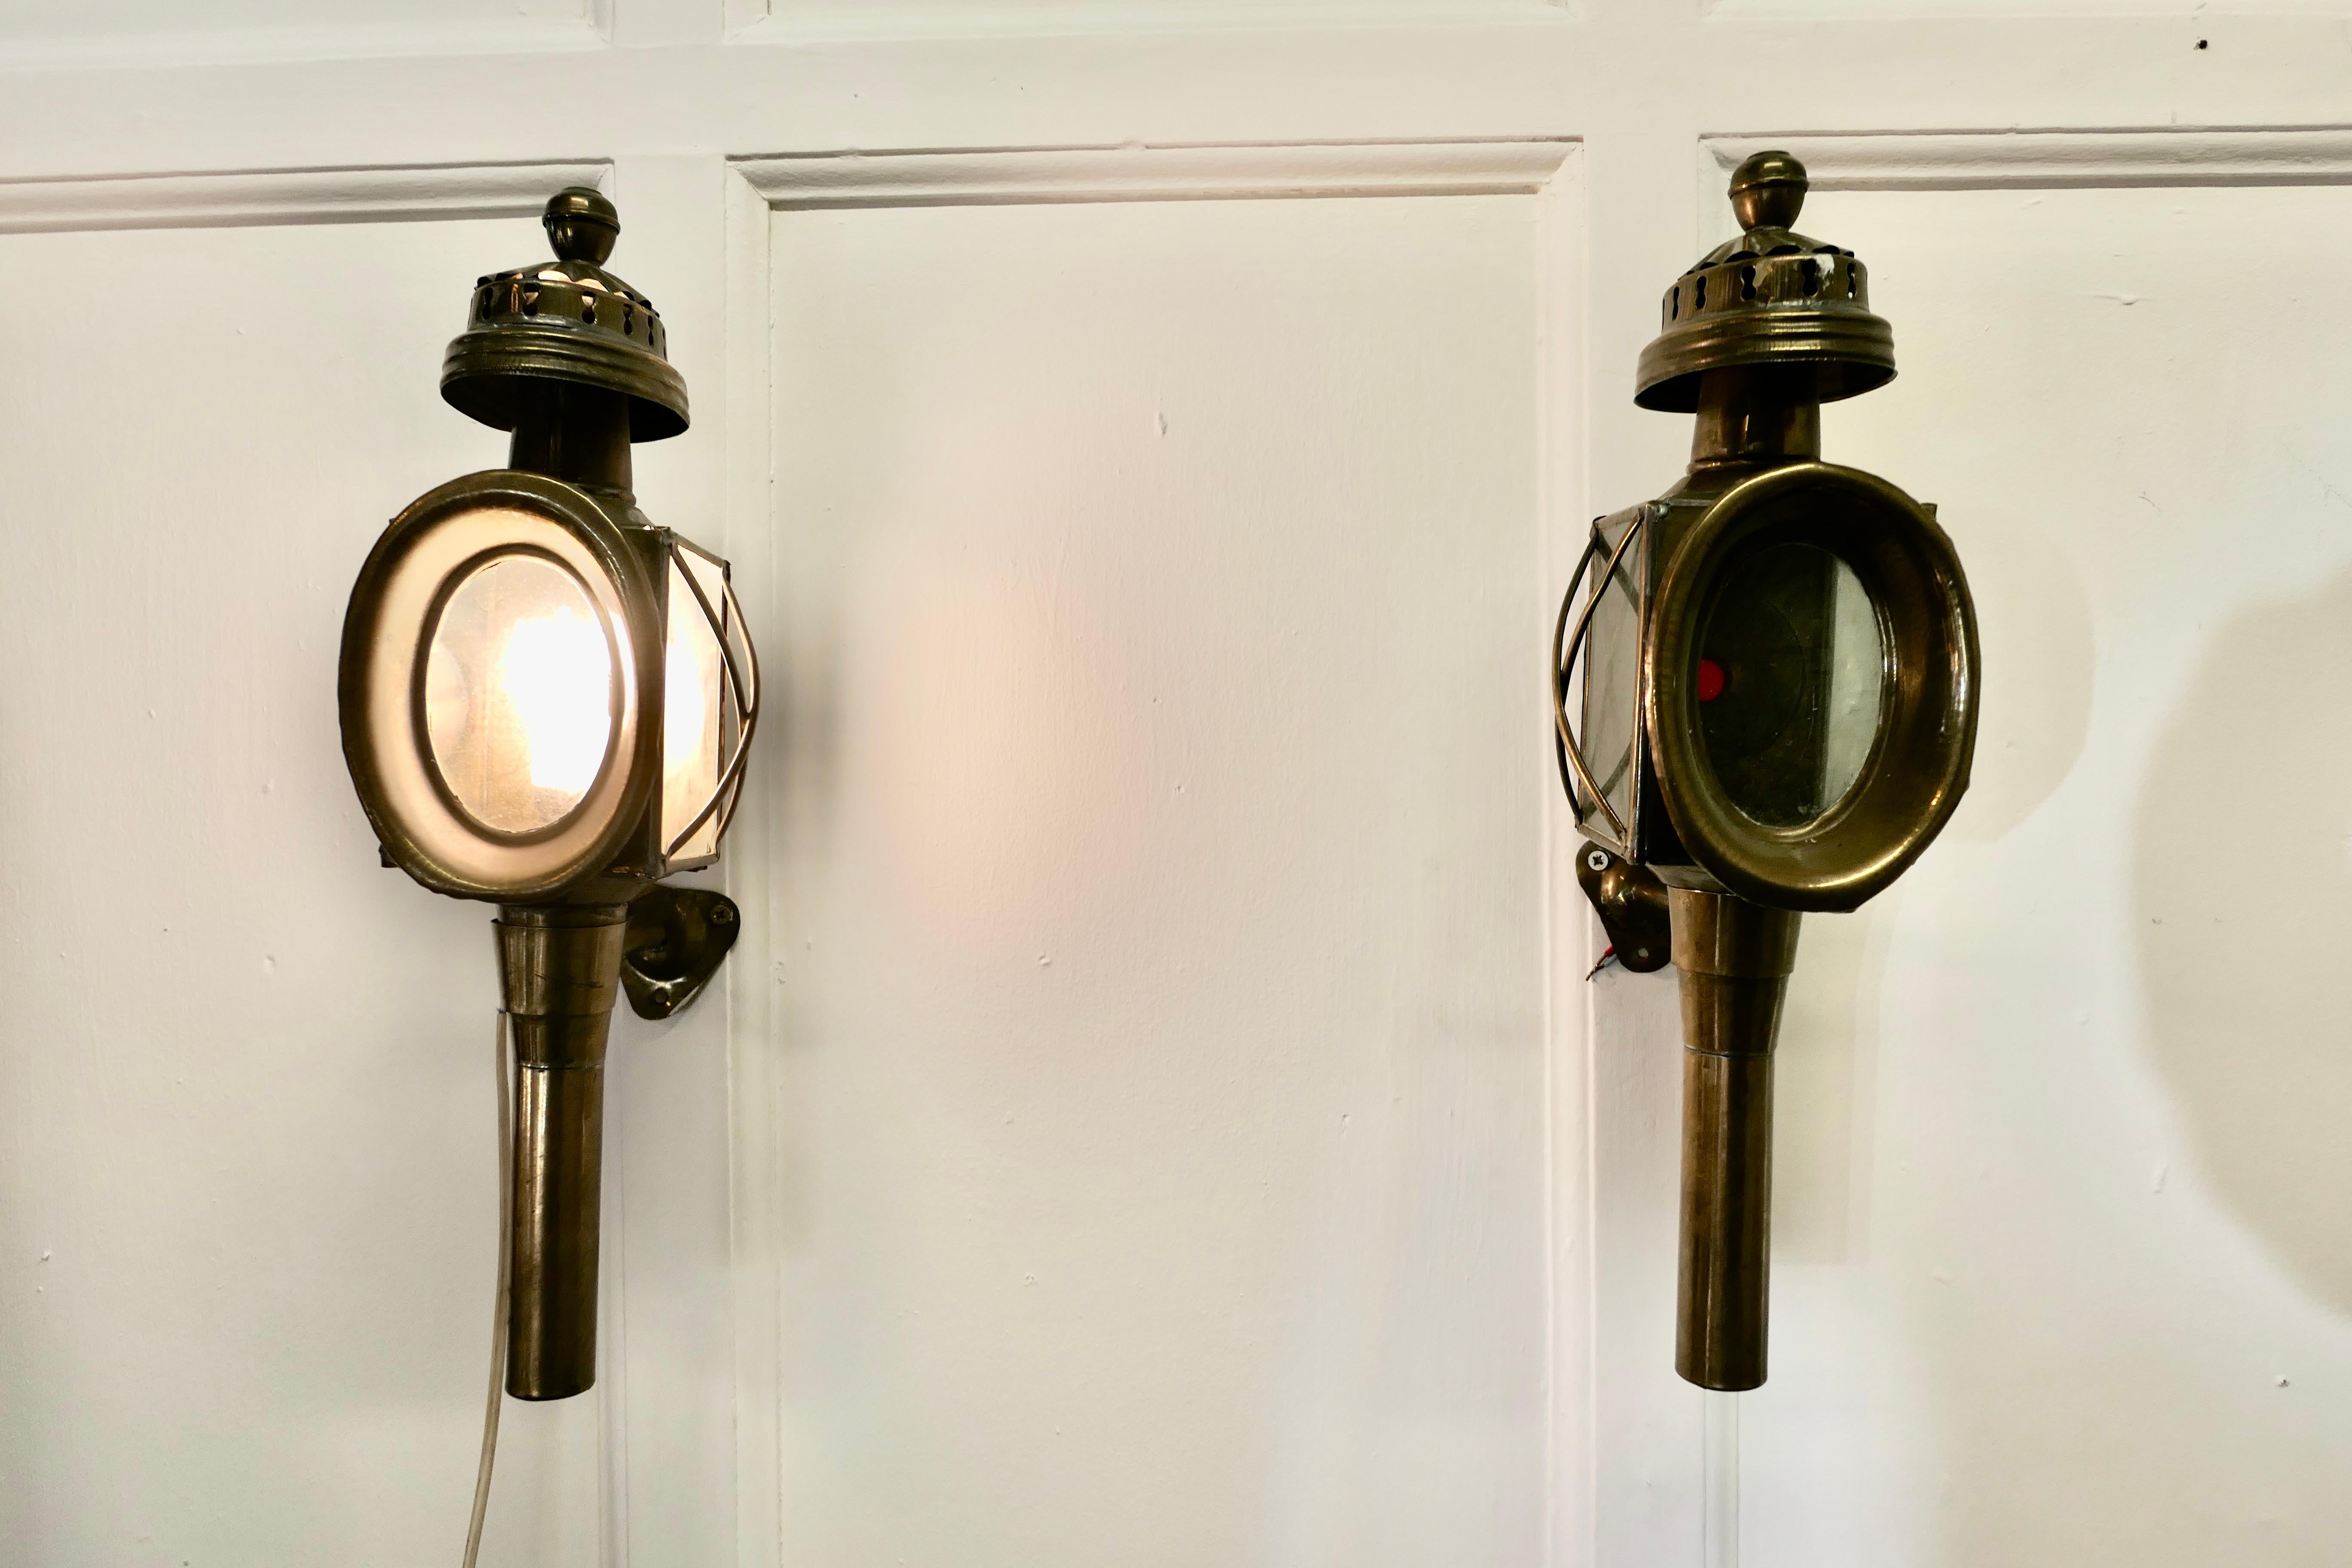 2 French Electrified Brass Carriage Lights, Wall Lanterns

2 Lovely pieces, dating back to the 19th century 
Wonderfull authentic pieces, they are made in brass 
These lights would have been used on the side of a carriage, originally they would have